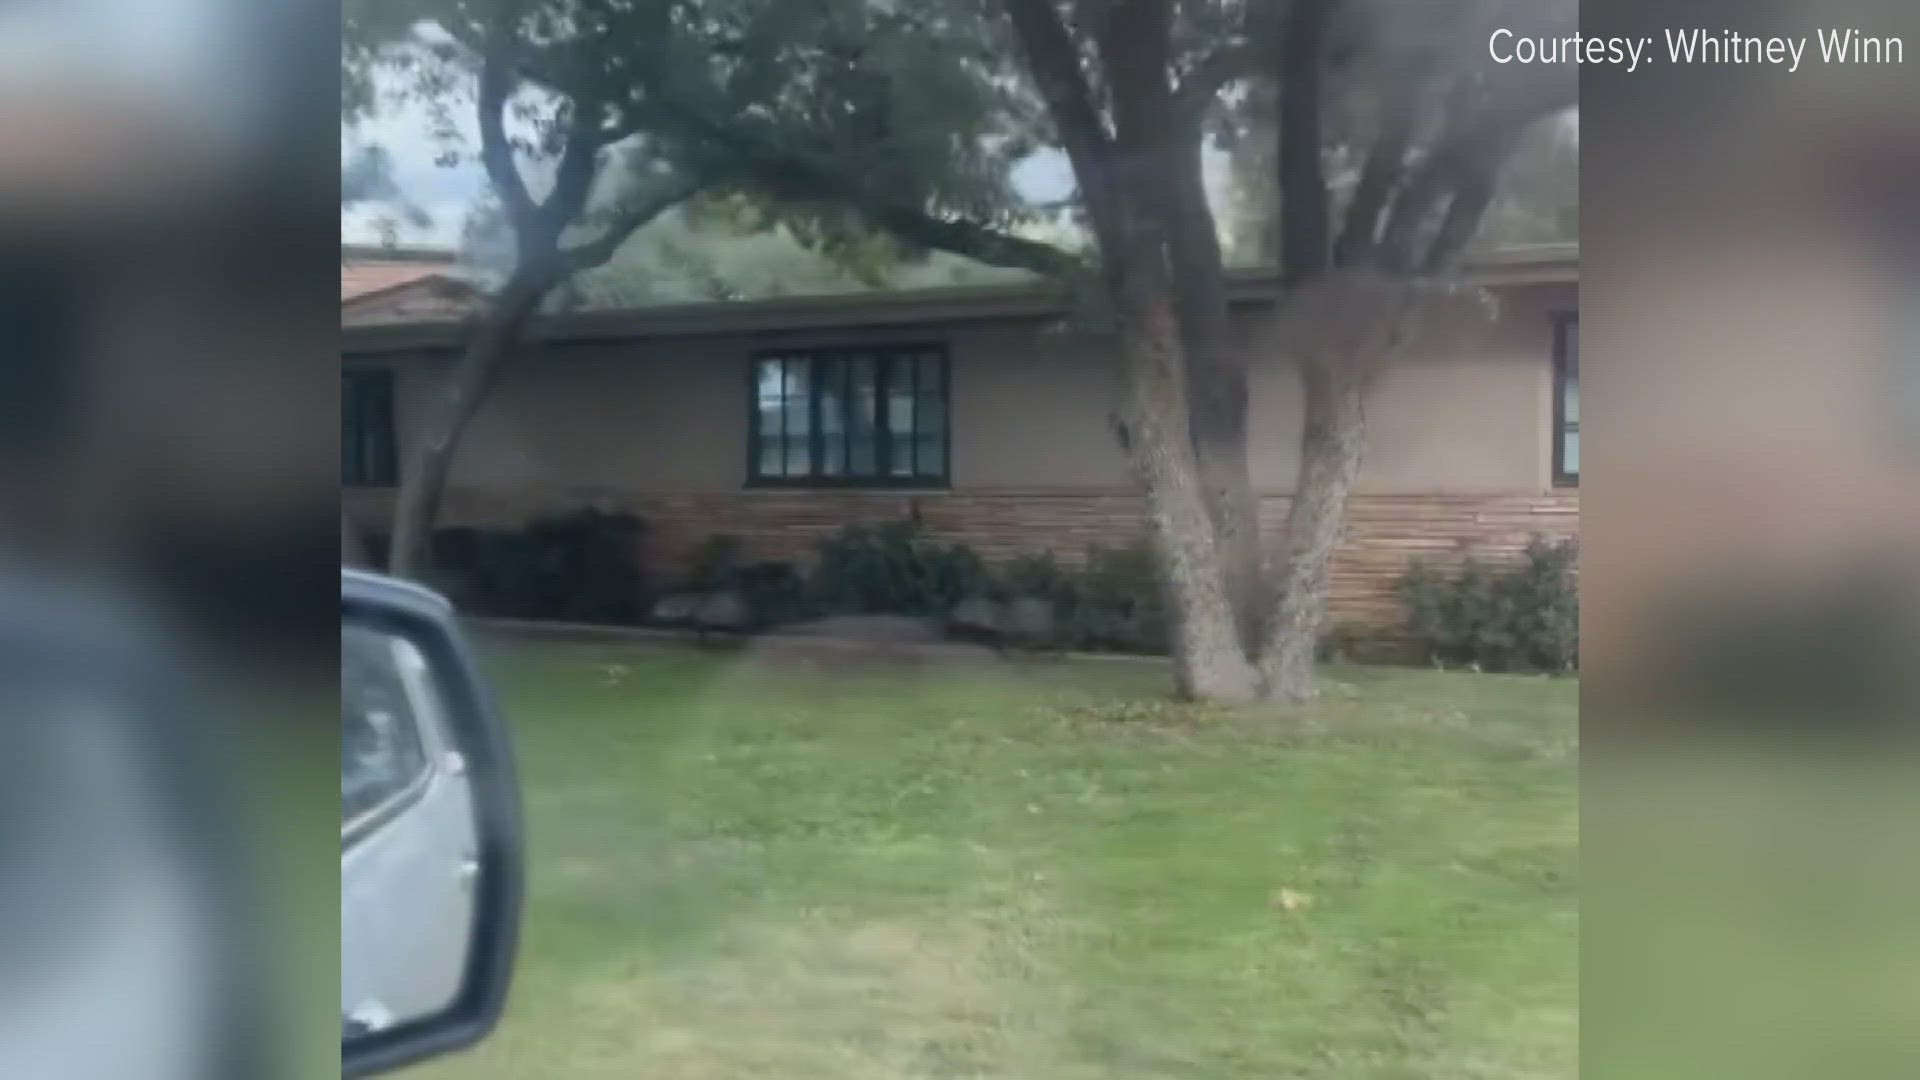 Whitney Winn and her husband were taking their daughter to school Thursday morning when they spotted two javelinas in someone's front yard.